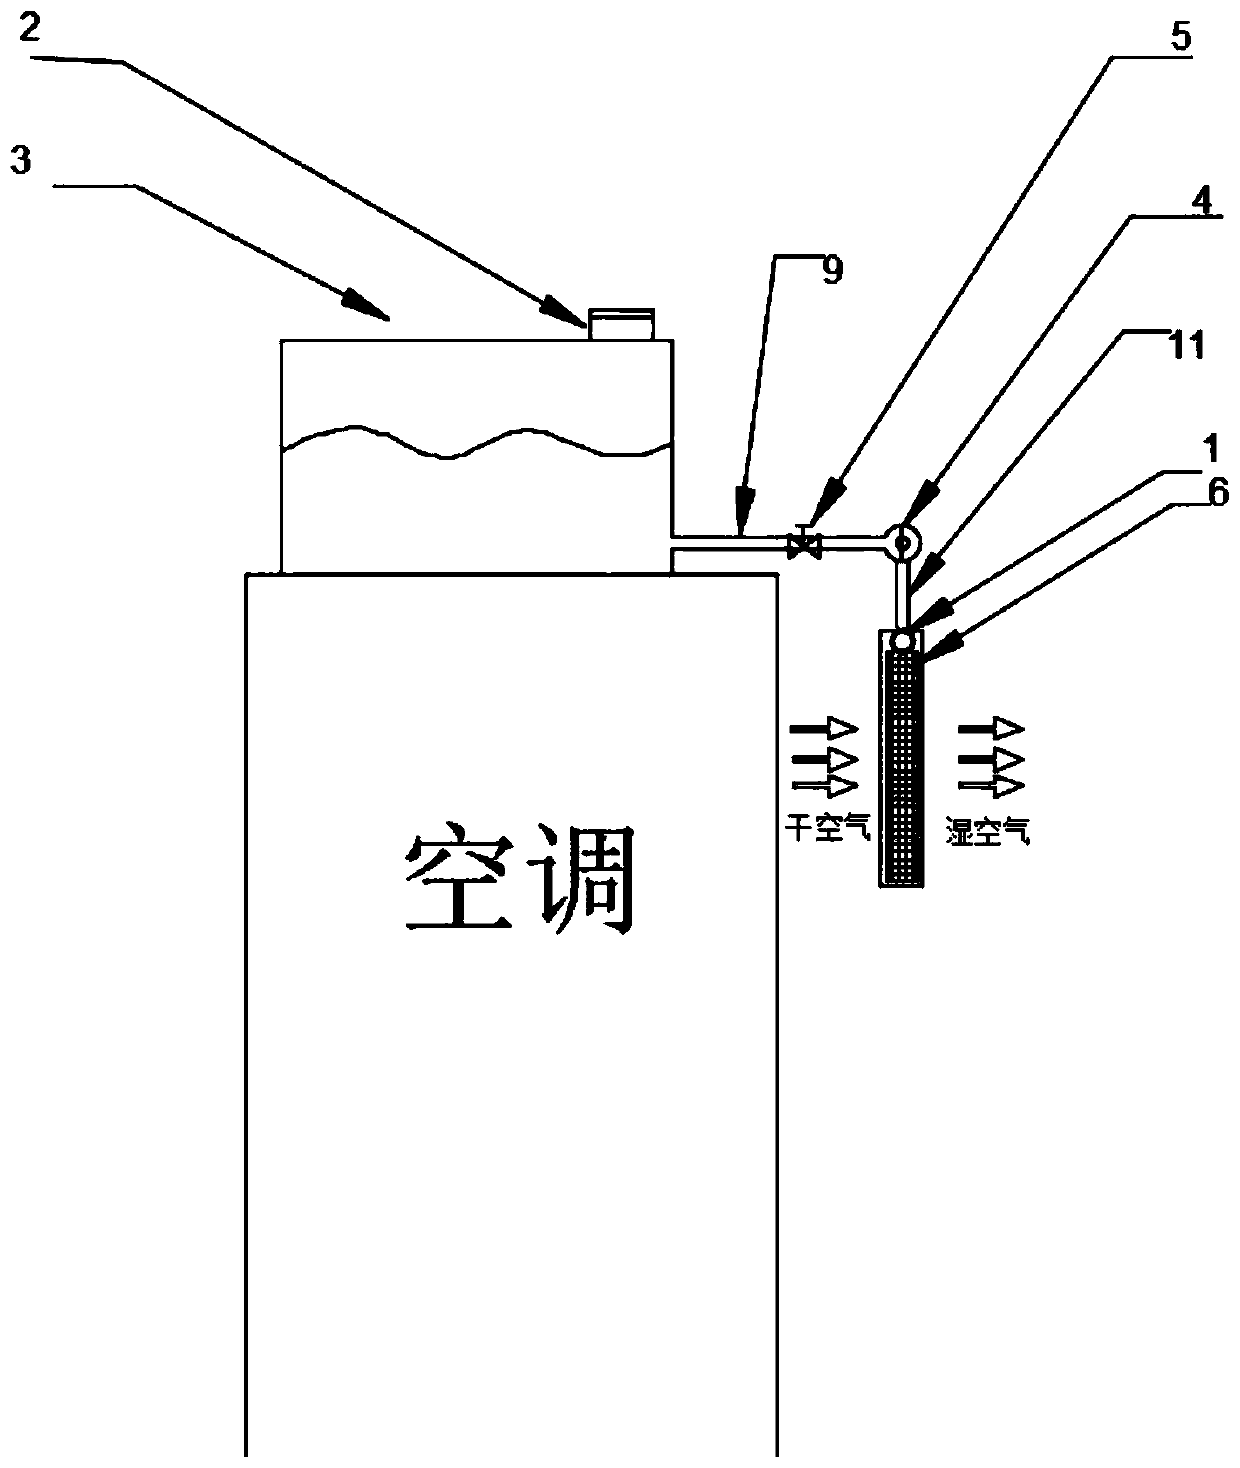 Auxiliary device for humidifying and purifying air conditioners